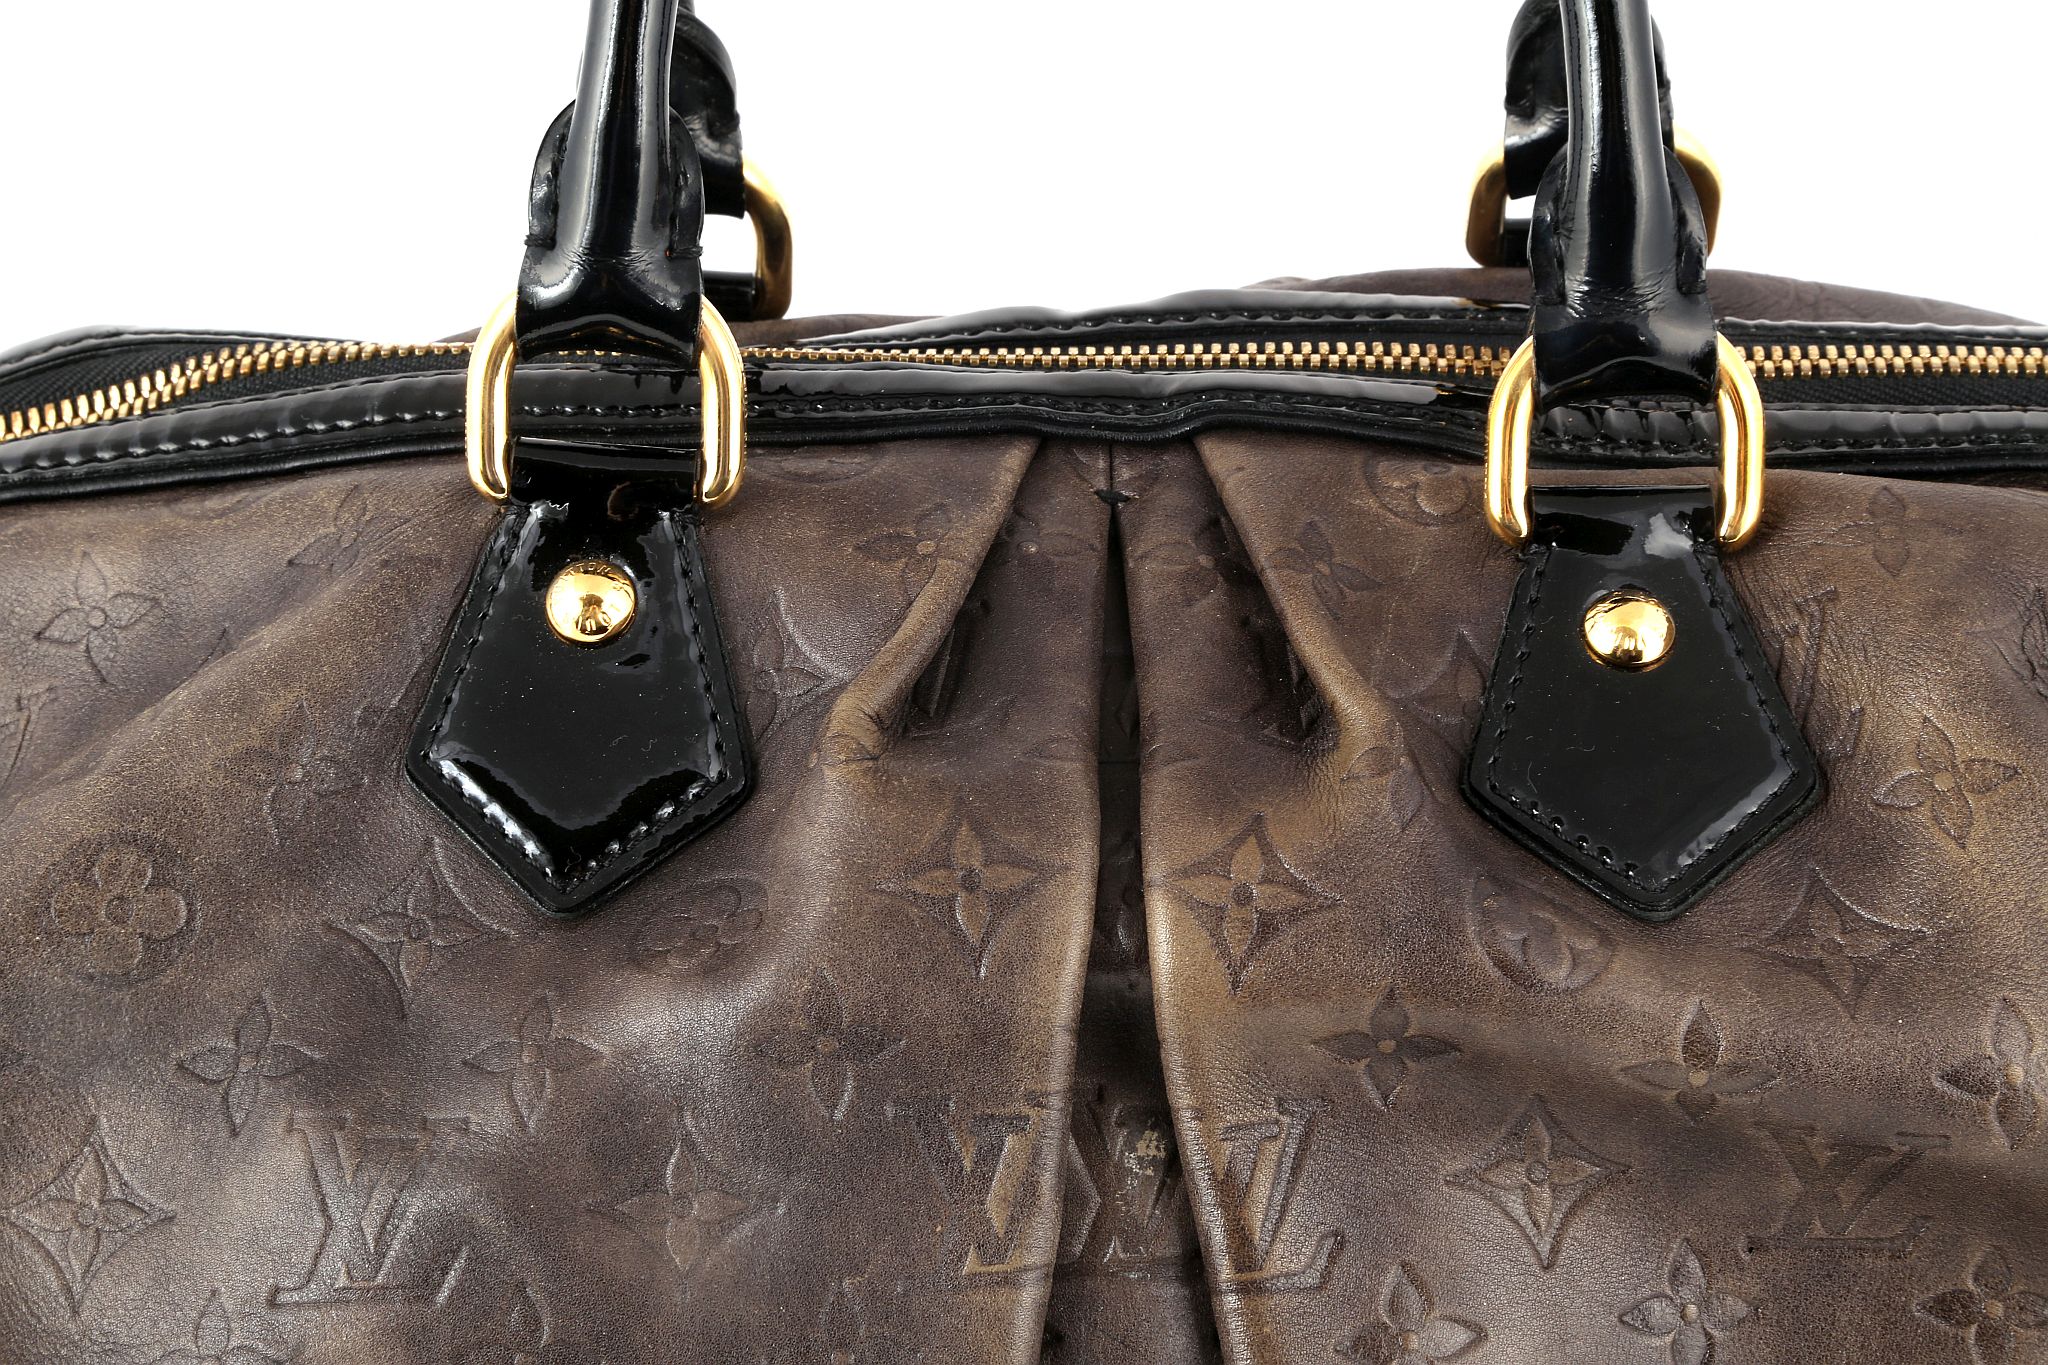 LOUIS VUITTON STEPHEN BOSTON HANDBAG, date code for 2006, embossed monogram leather with black - Image 3 of 12